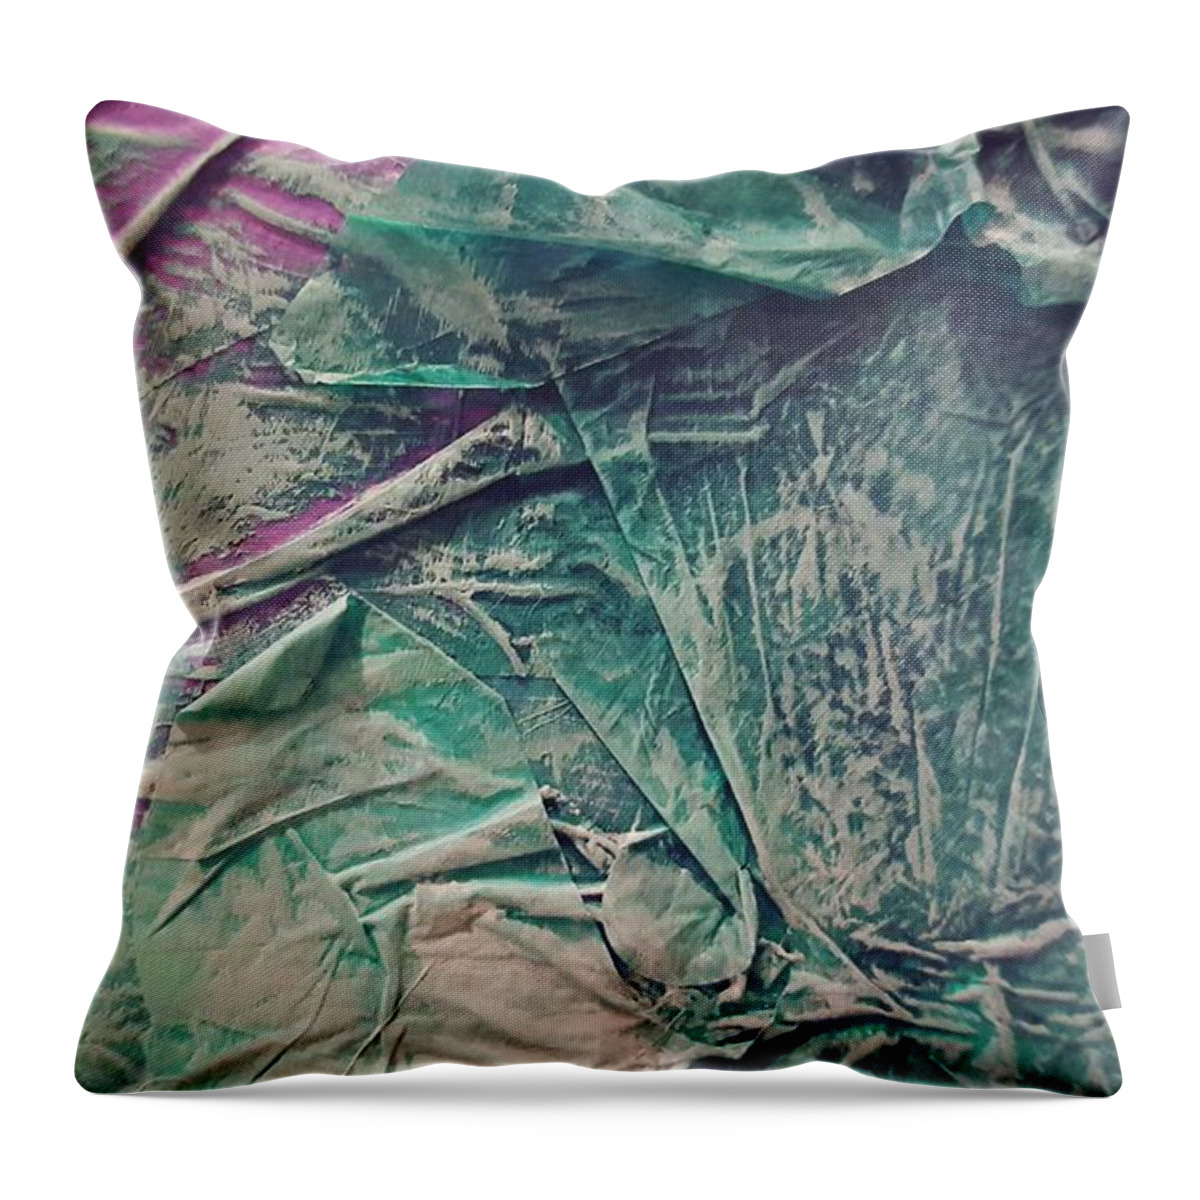 Plastic Throw Pillow featuring the mixed media Over Abundance by Stephanie Hollingsworth